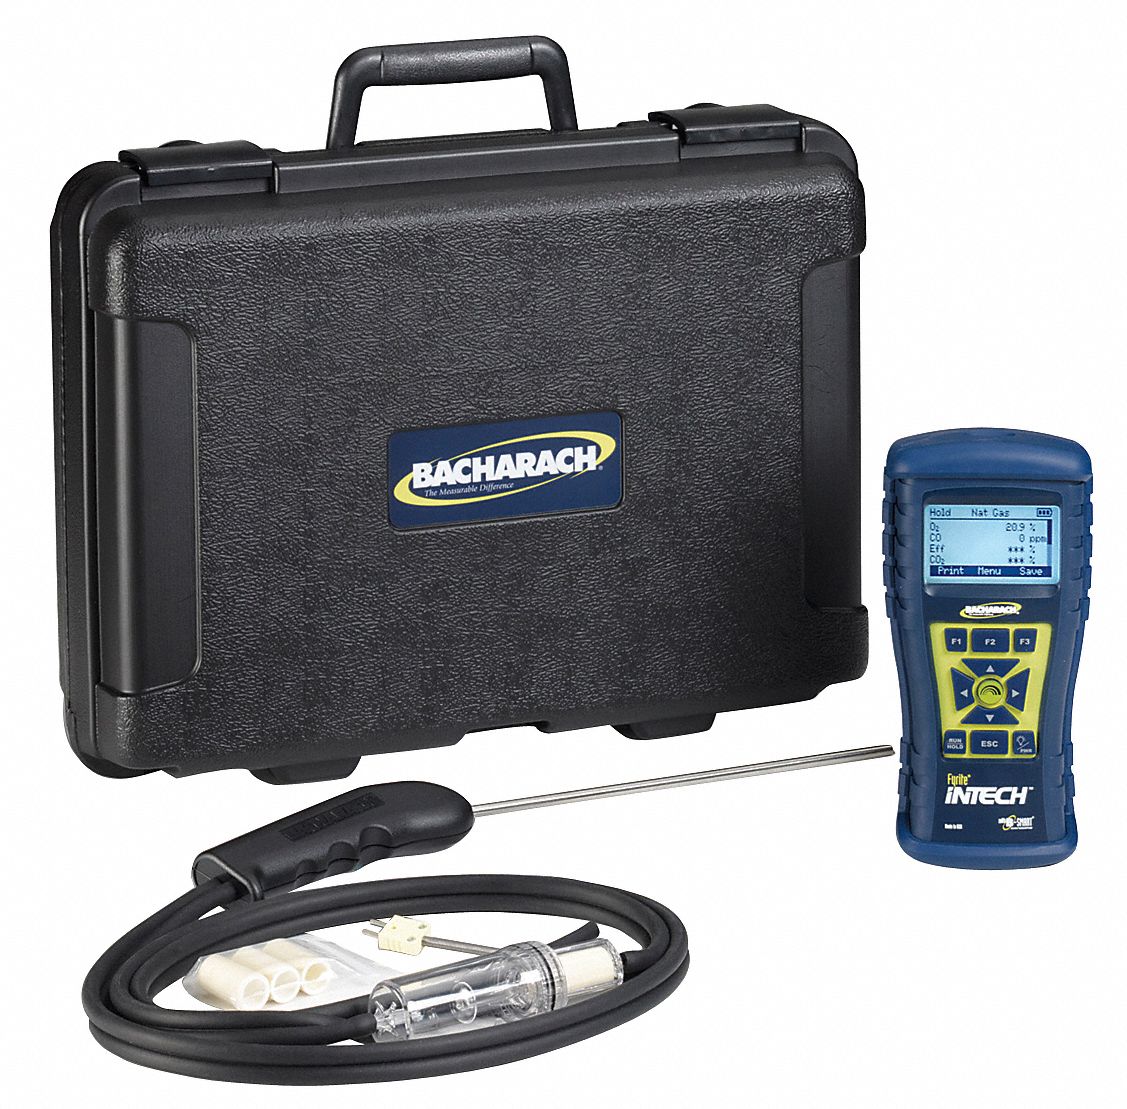 BACHARACH Combustion Analyzer Kit: Carrying Case, 0 ppm to 2,000 ppm, -4°F  to 1,202°F, 0024-8523